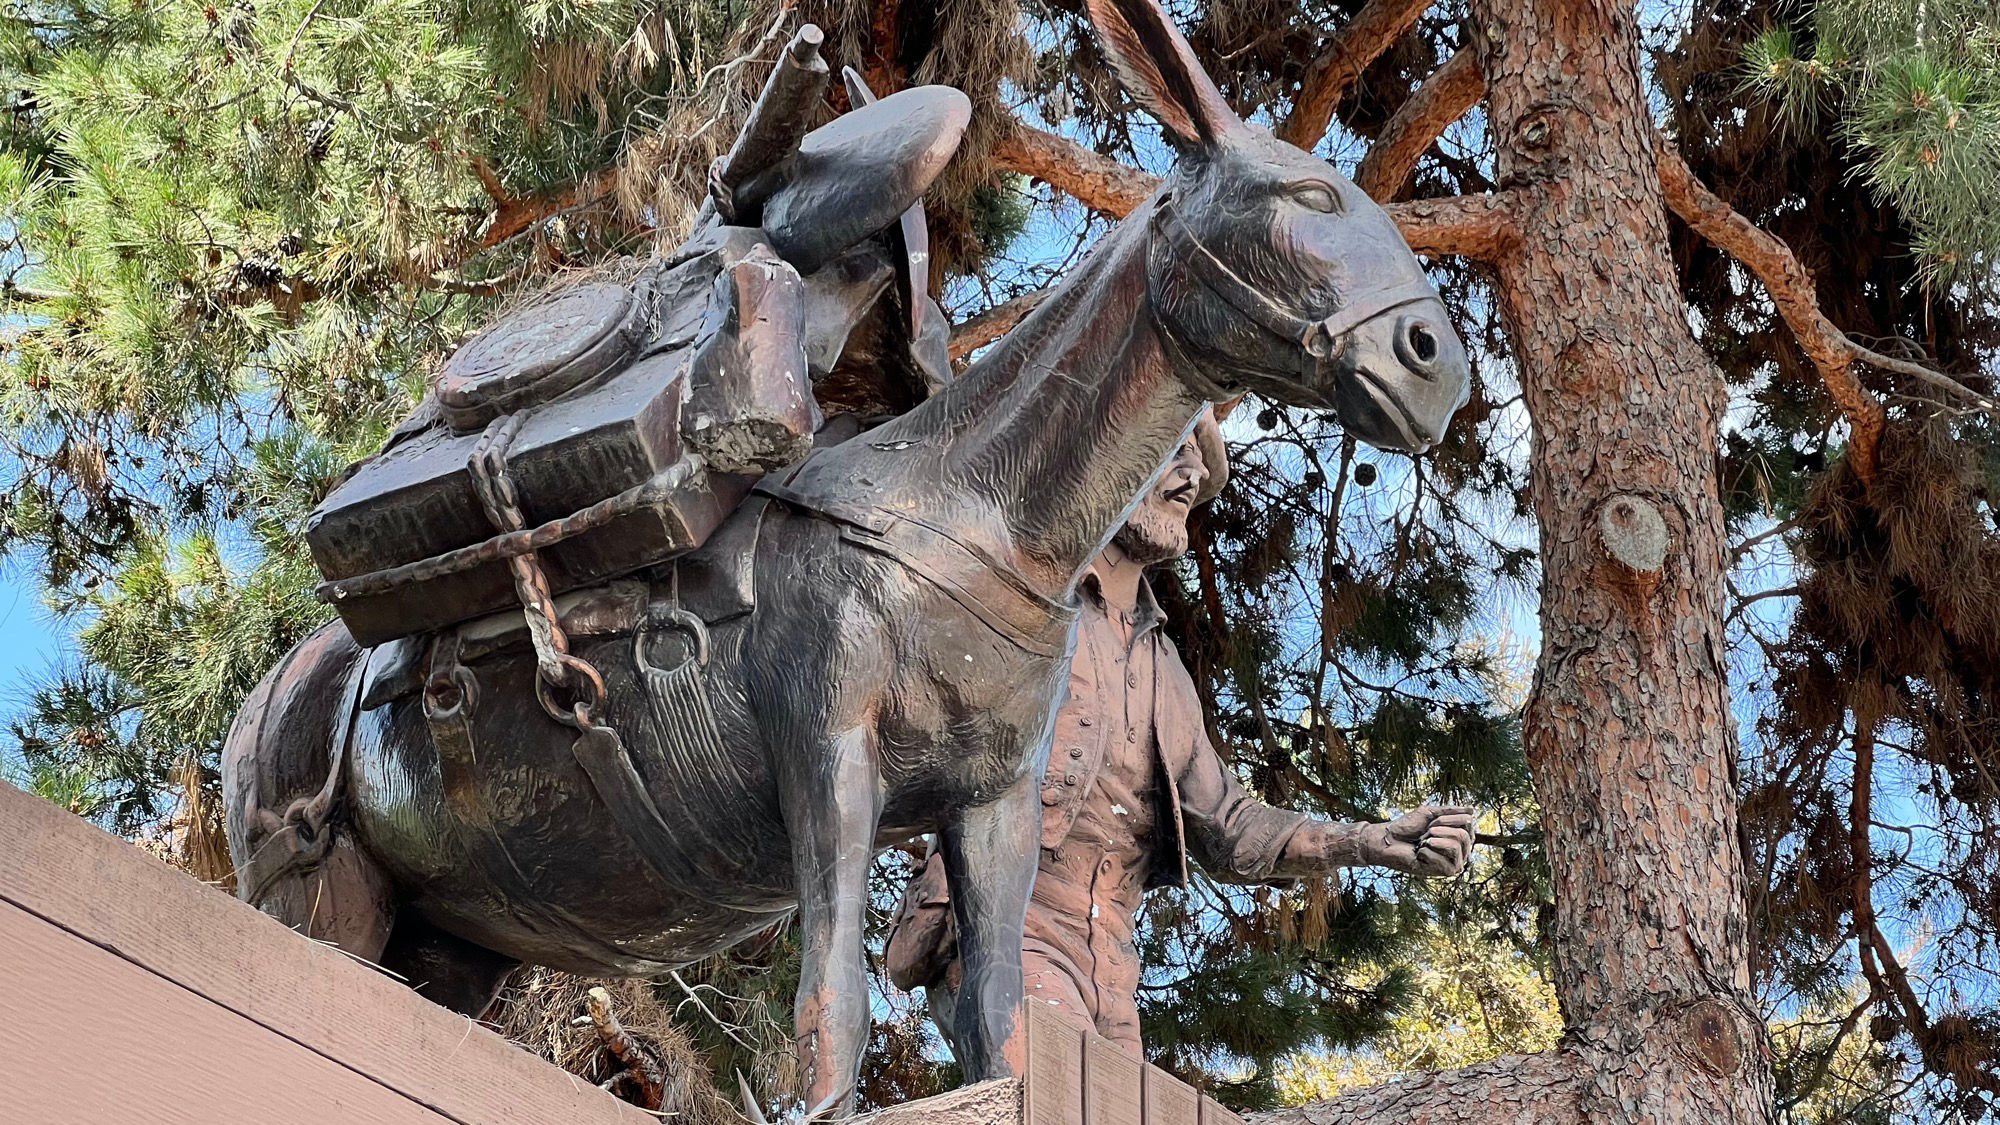 Pioneering Prospector and Burro - The Pack Mule